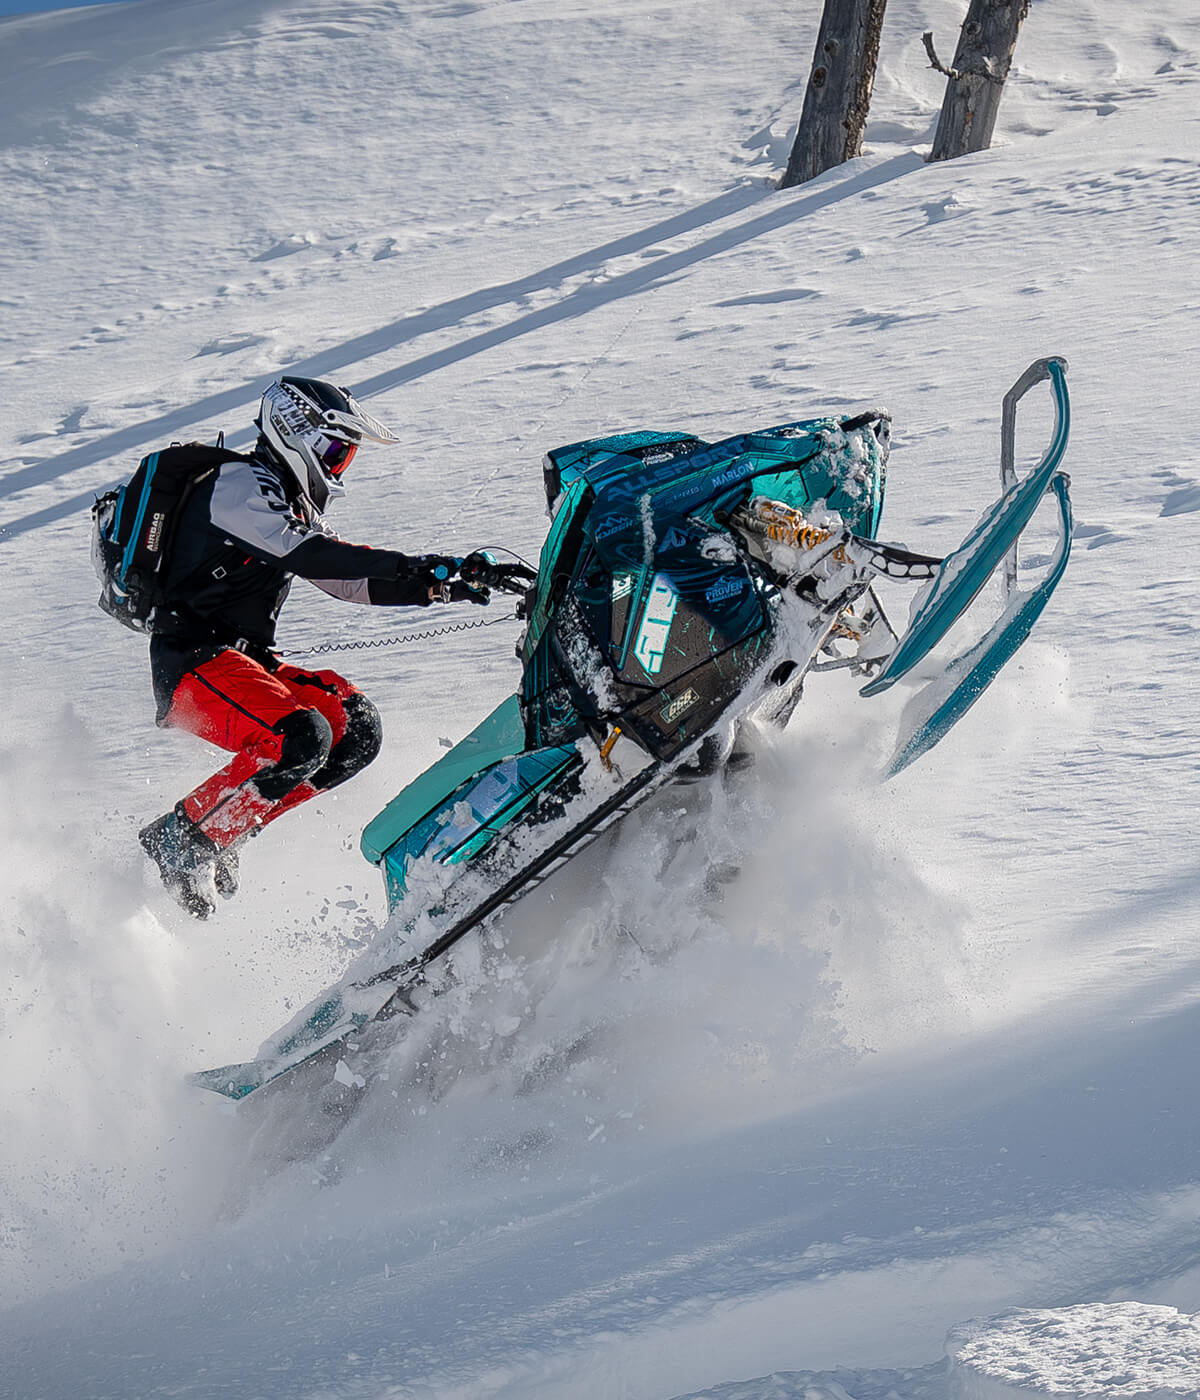 C&A Pro backcountry rider Scott Eyer hopping over snowmobile with Sky Blue TMX skis